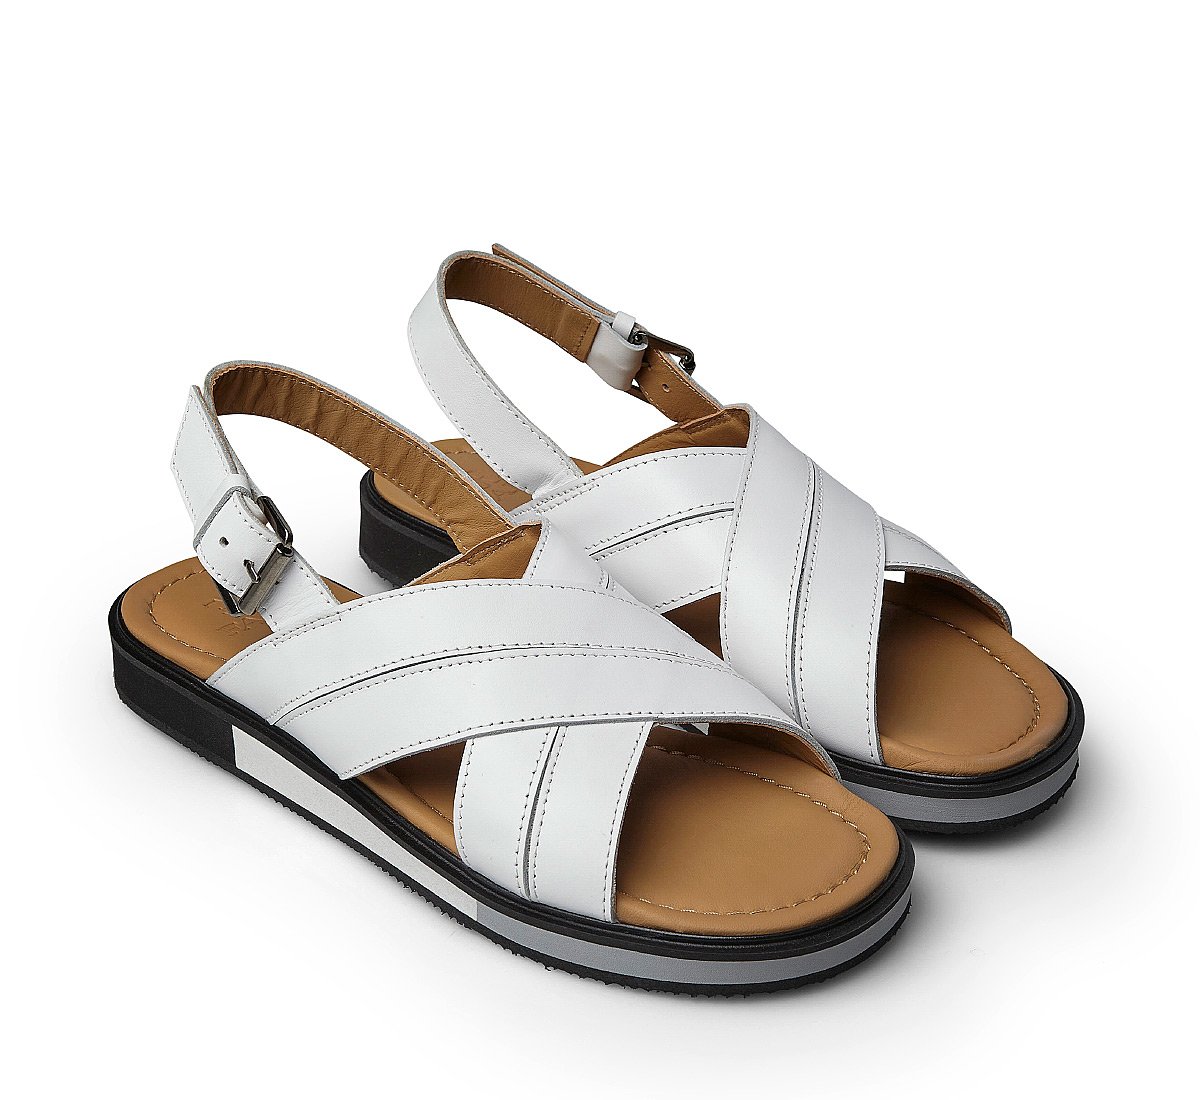 Sandal in nappa leather